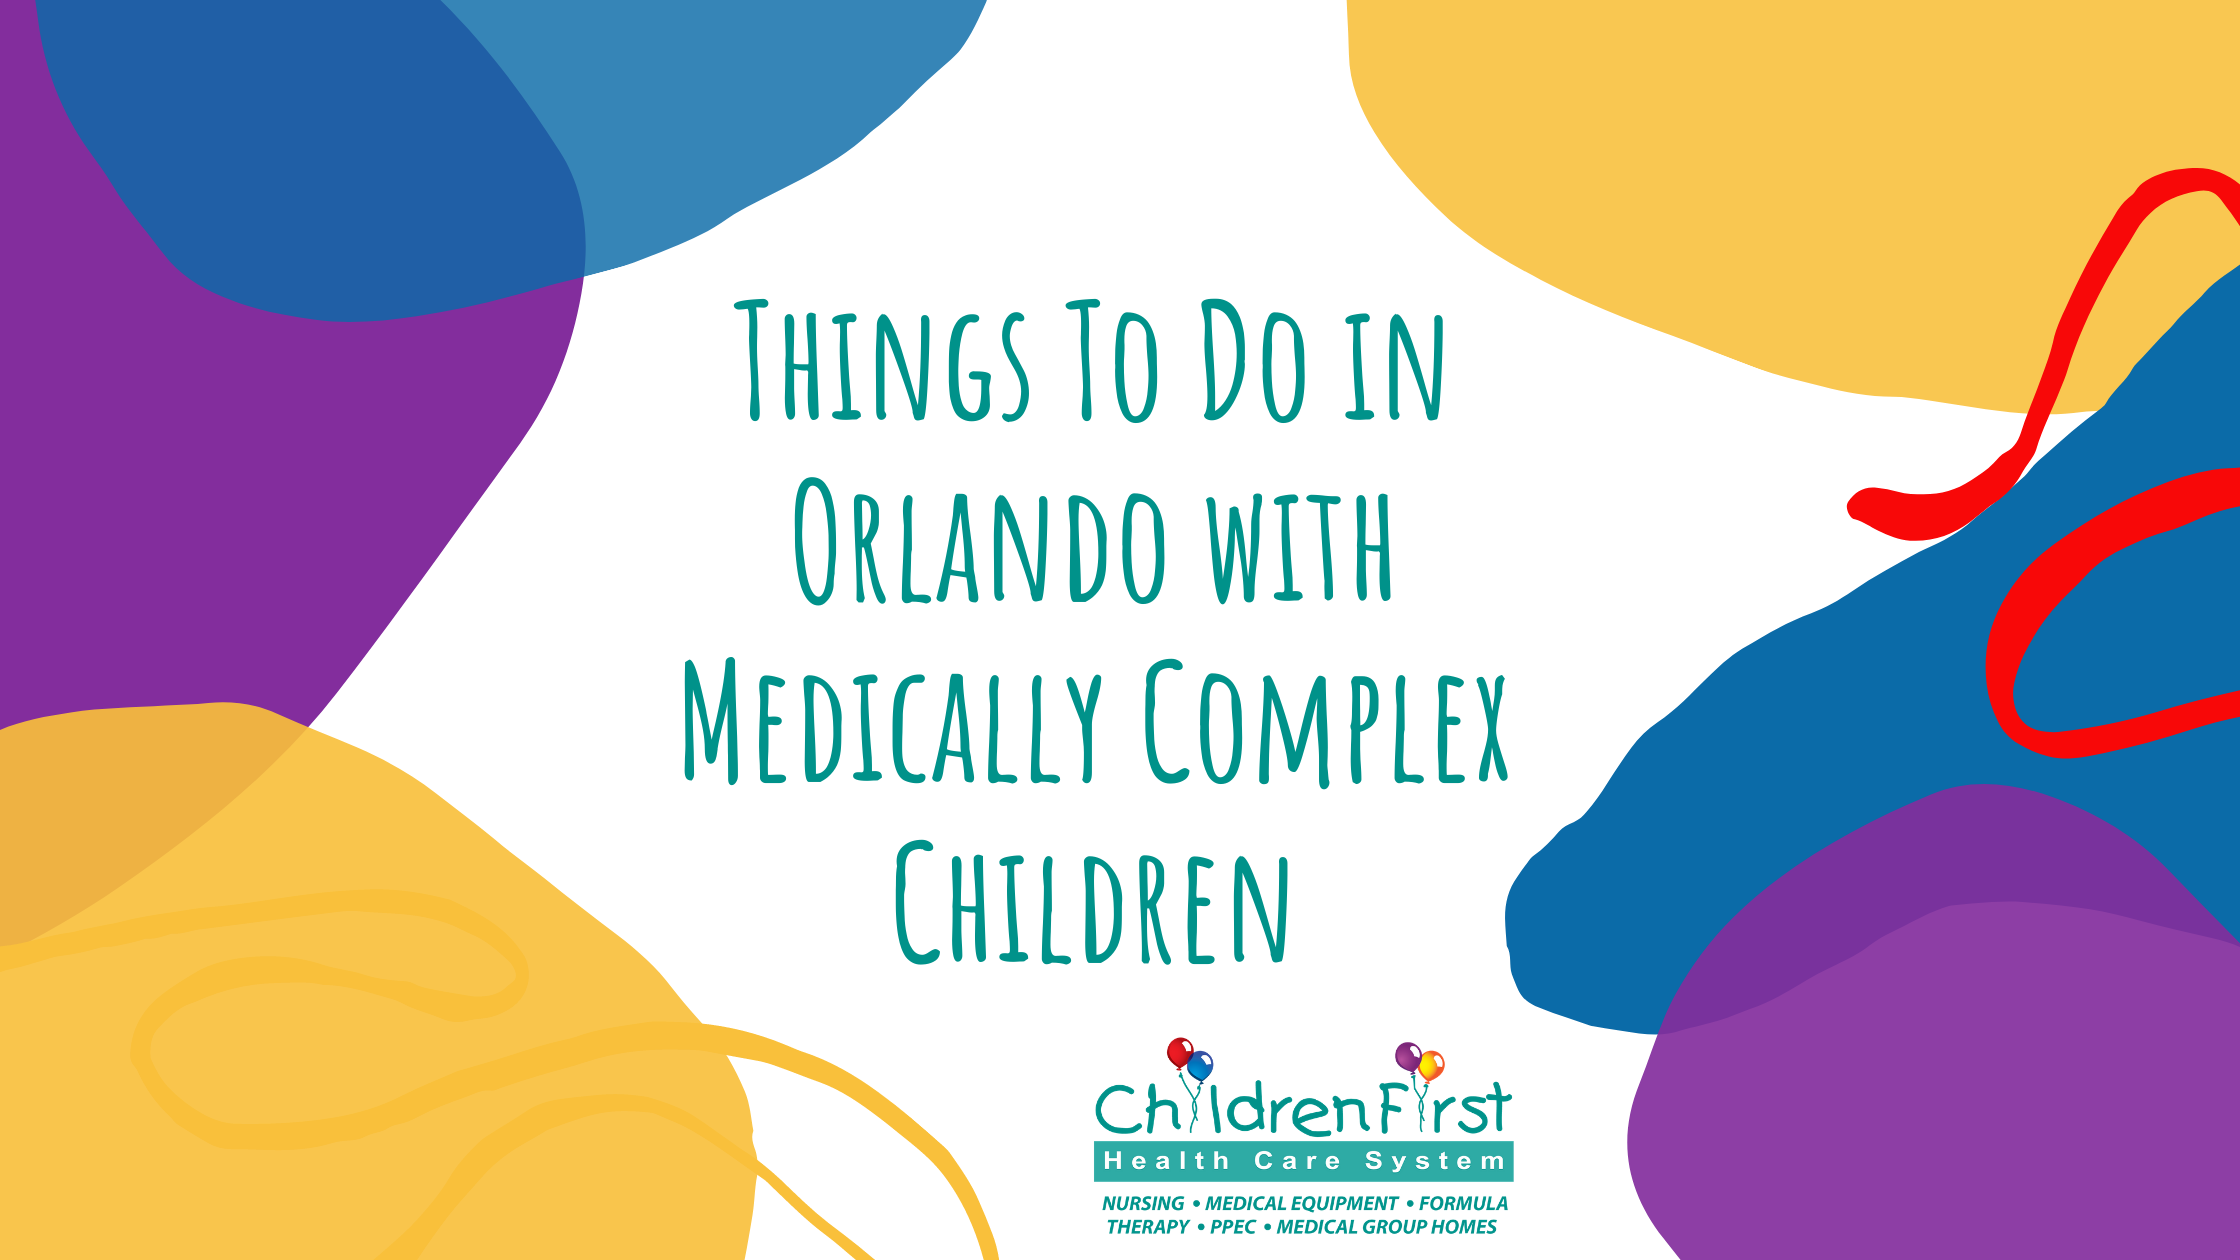 Things to do in Orlando with Medically Complex Children